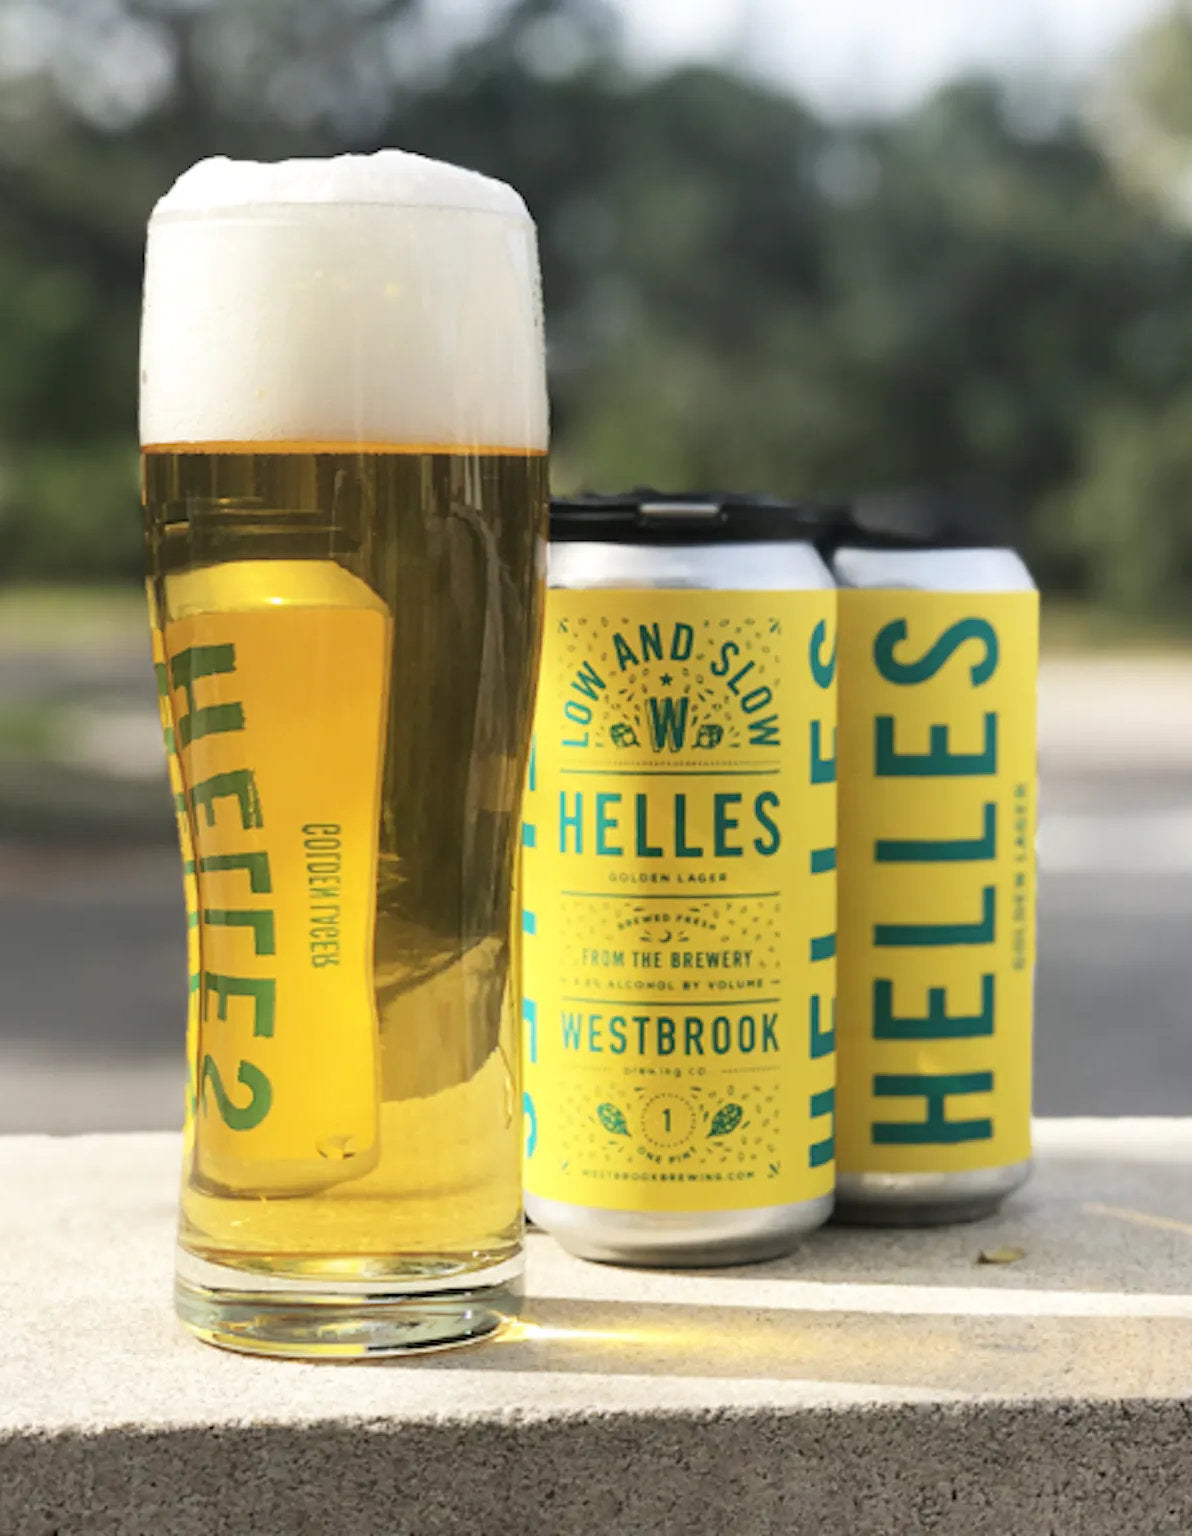 Low and Slow Helles